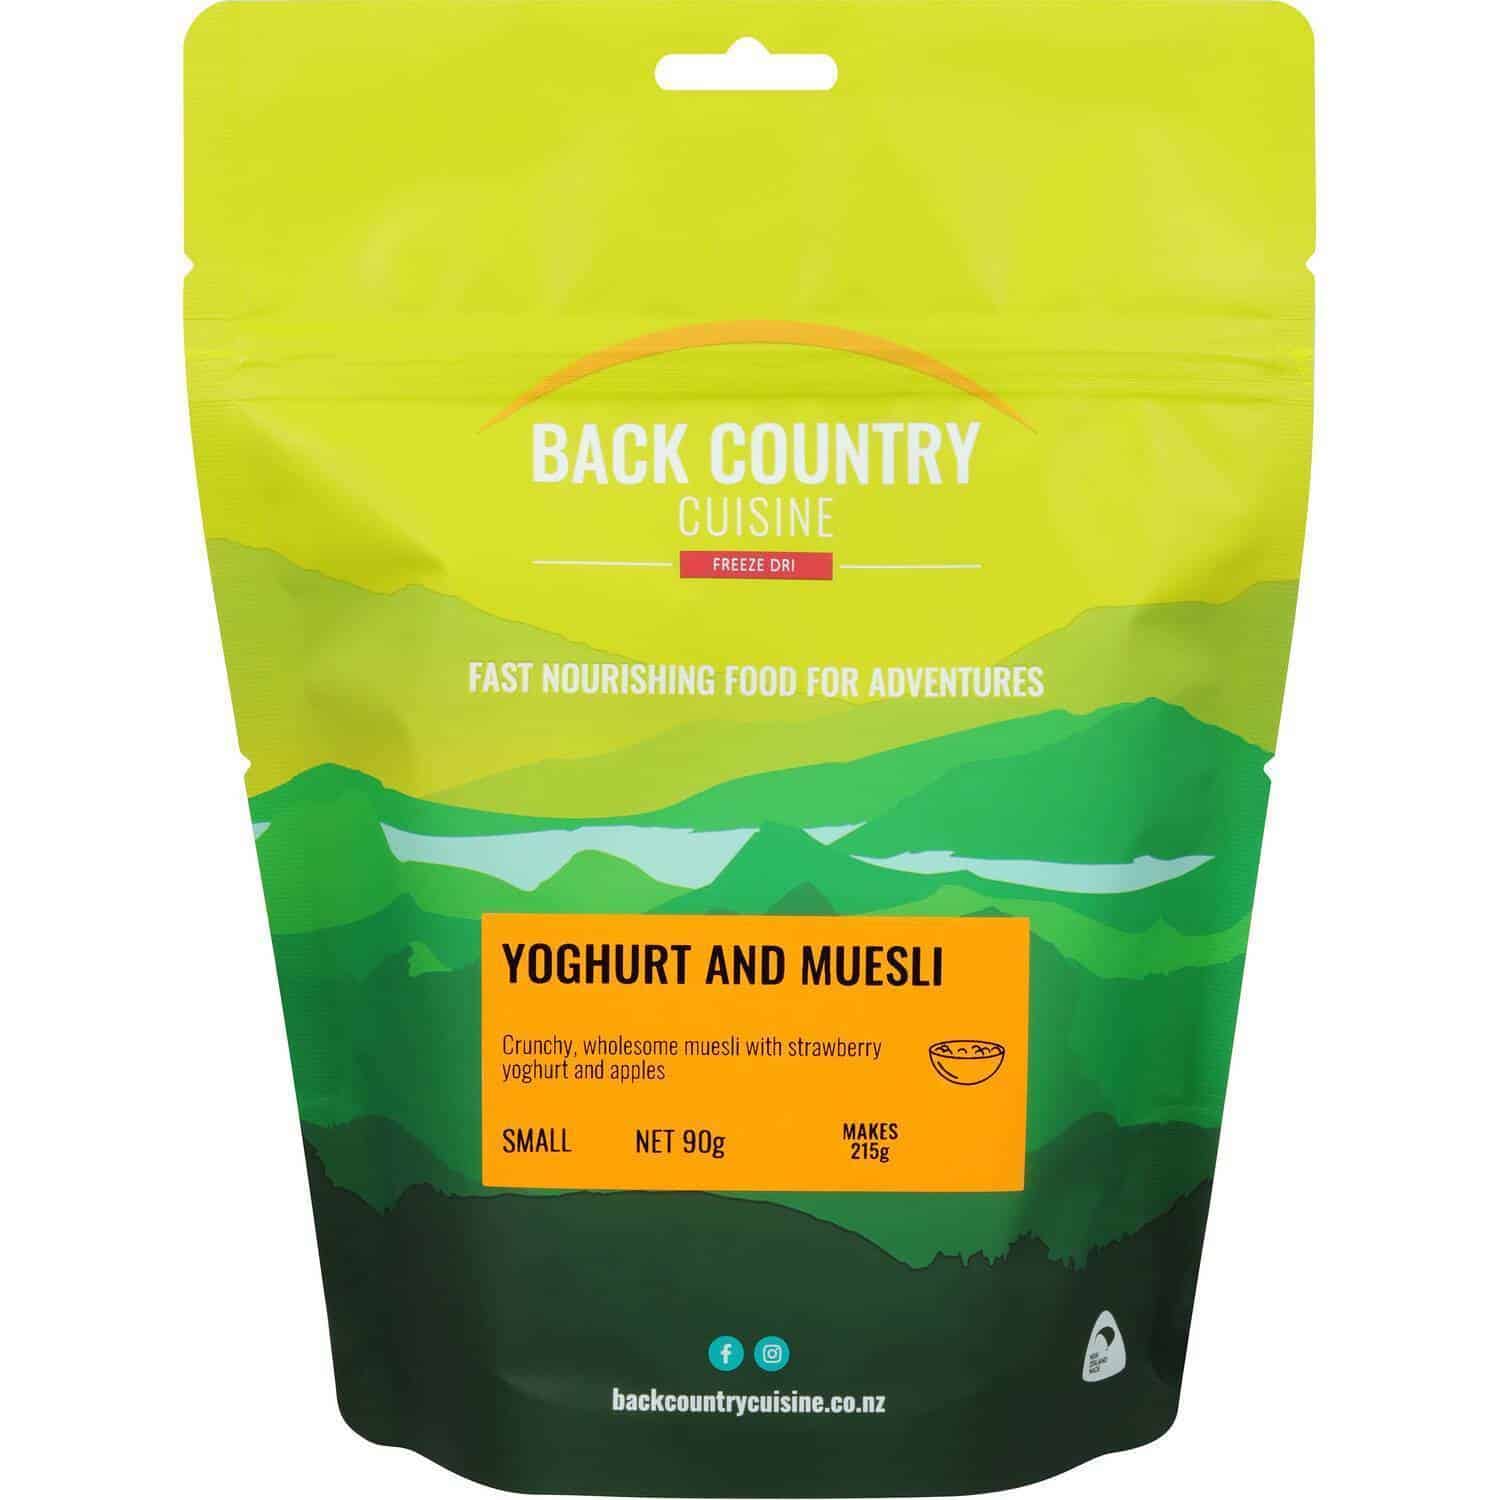 Back Country Cuisine Yoghurt & Museli Small - Tramping Food and Accessories sold by Venture Outdoors NZ